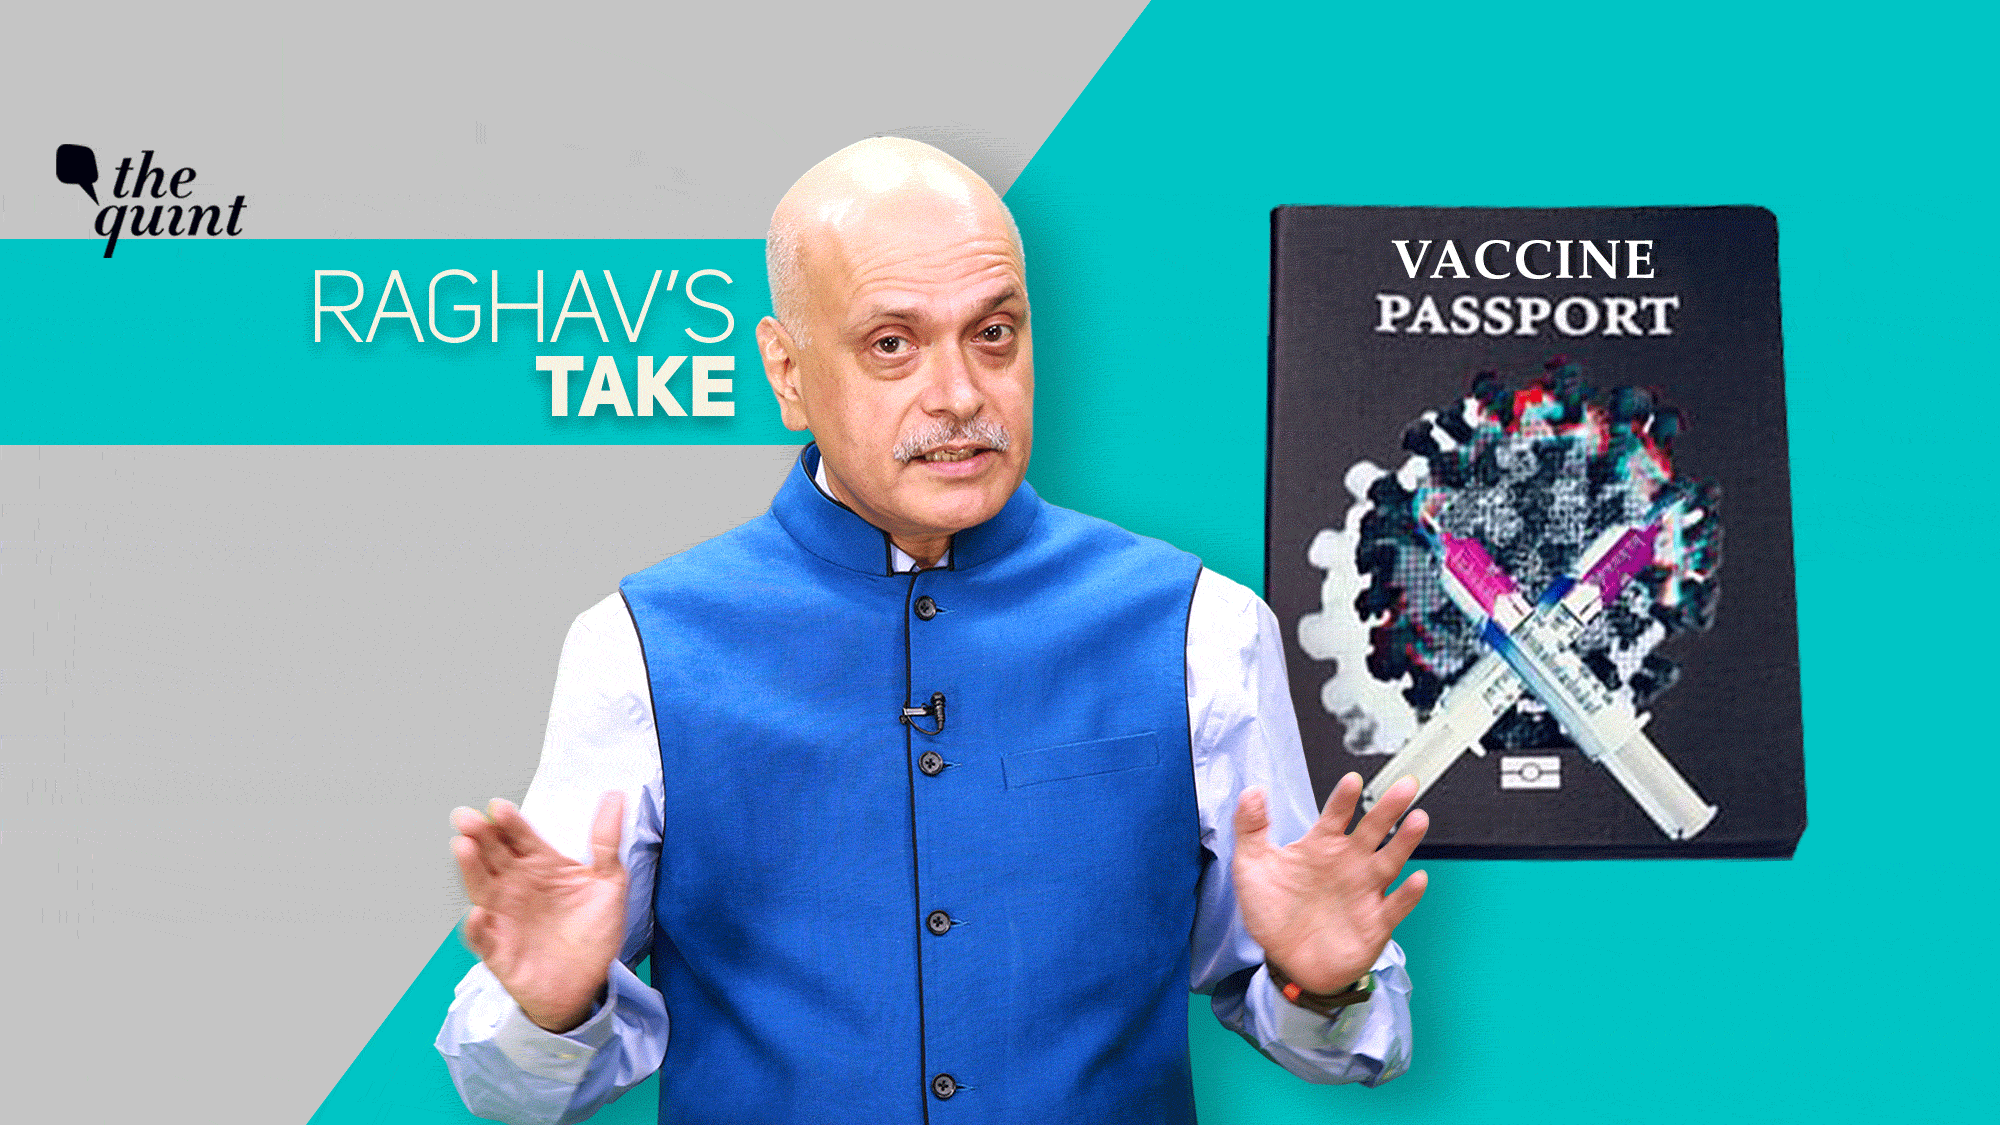 Image of The Quint’s Editor-in-Chief Raghav Bahl used for representational purposes.